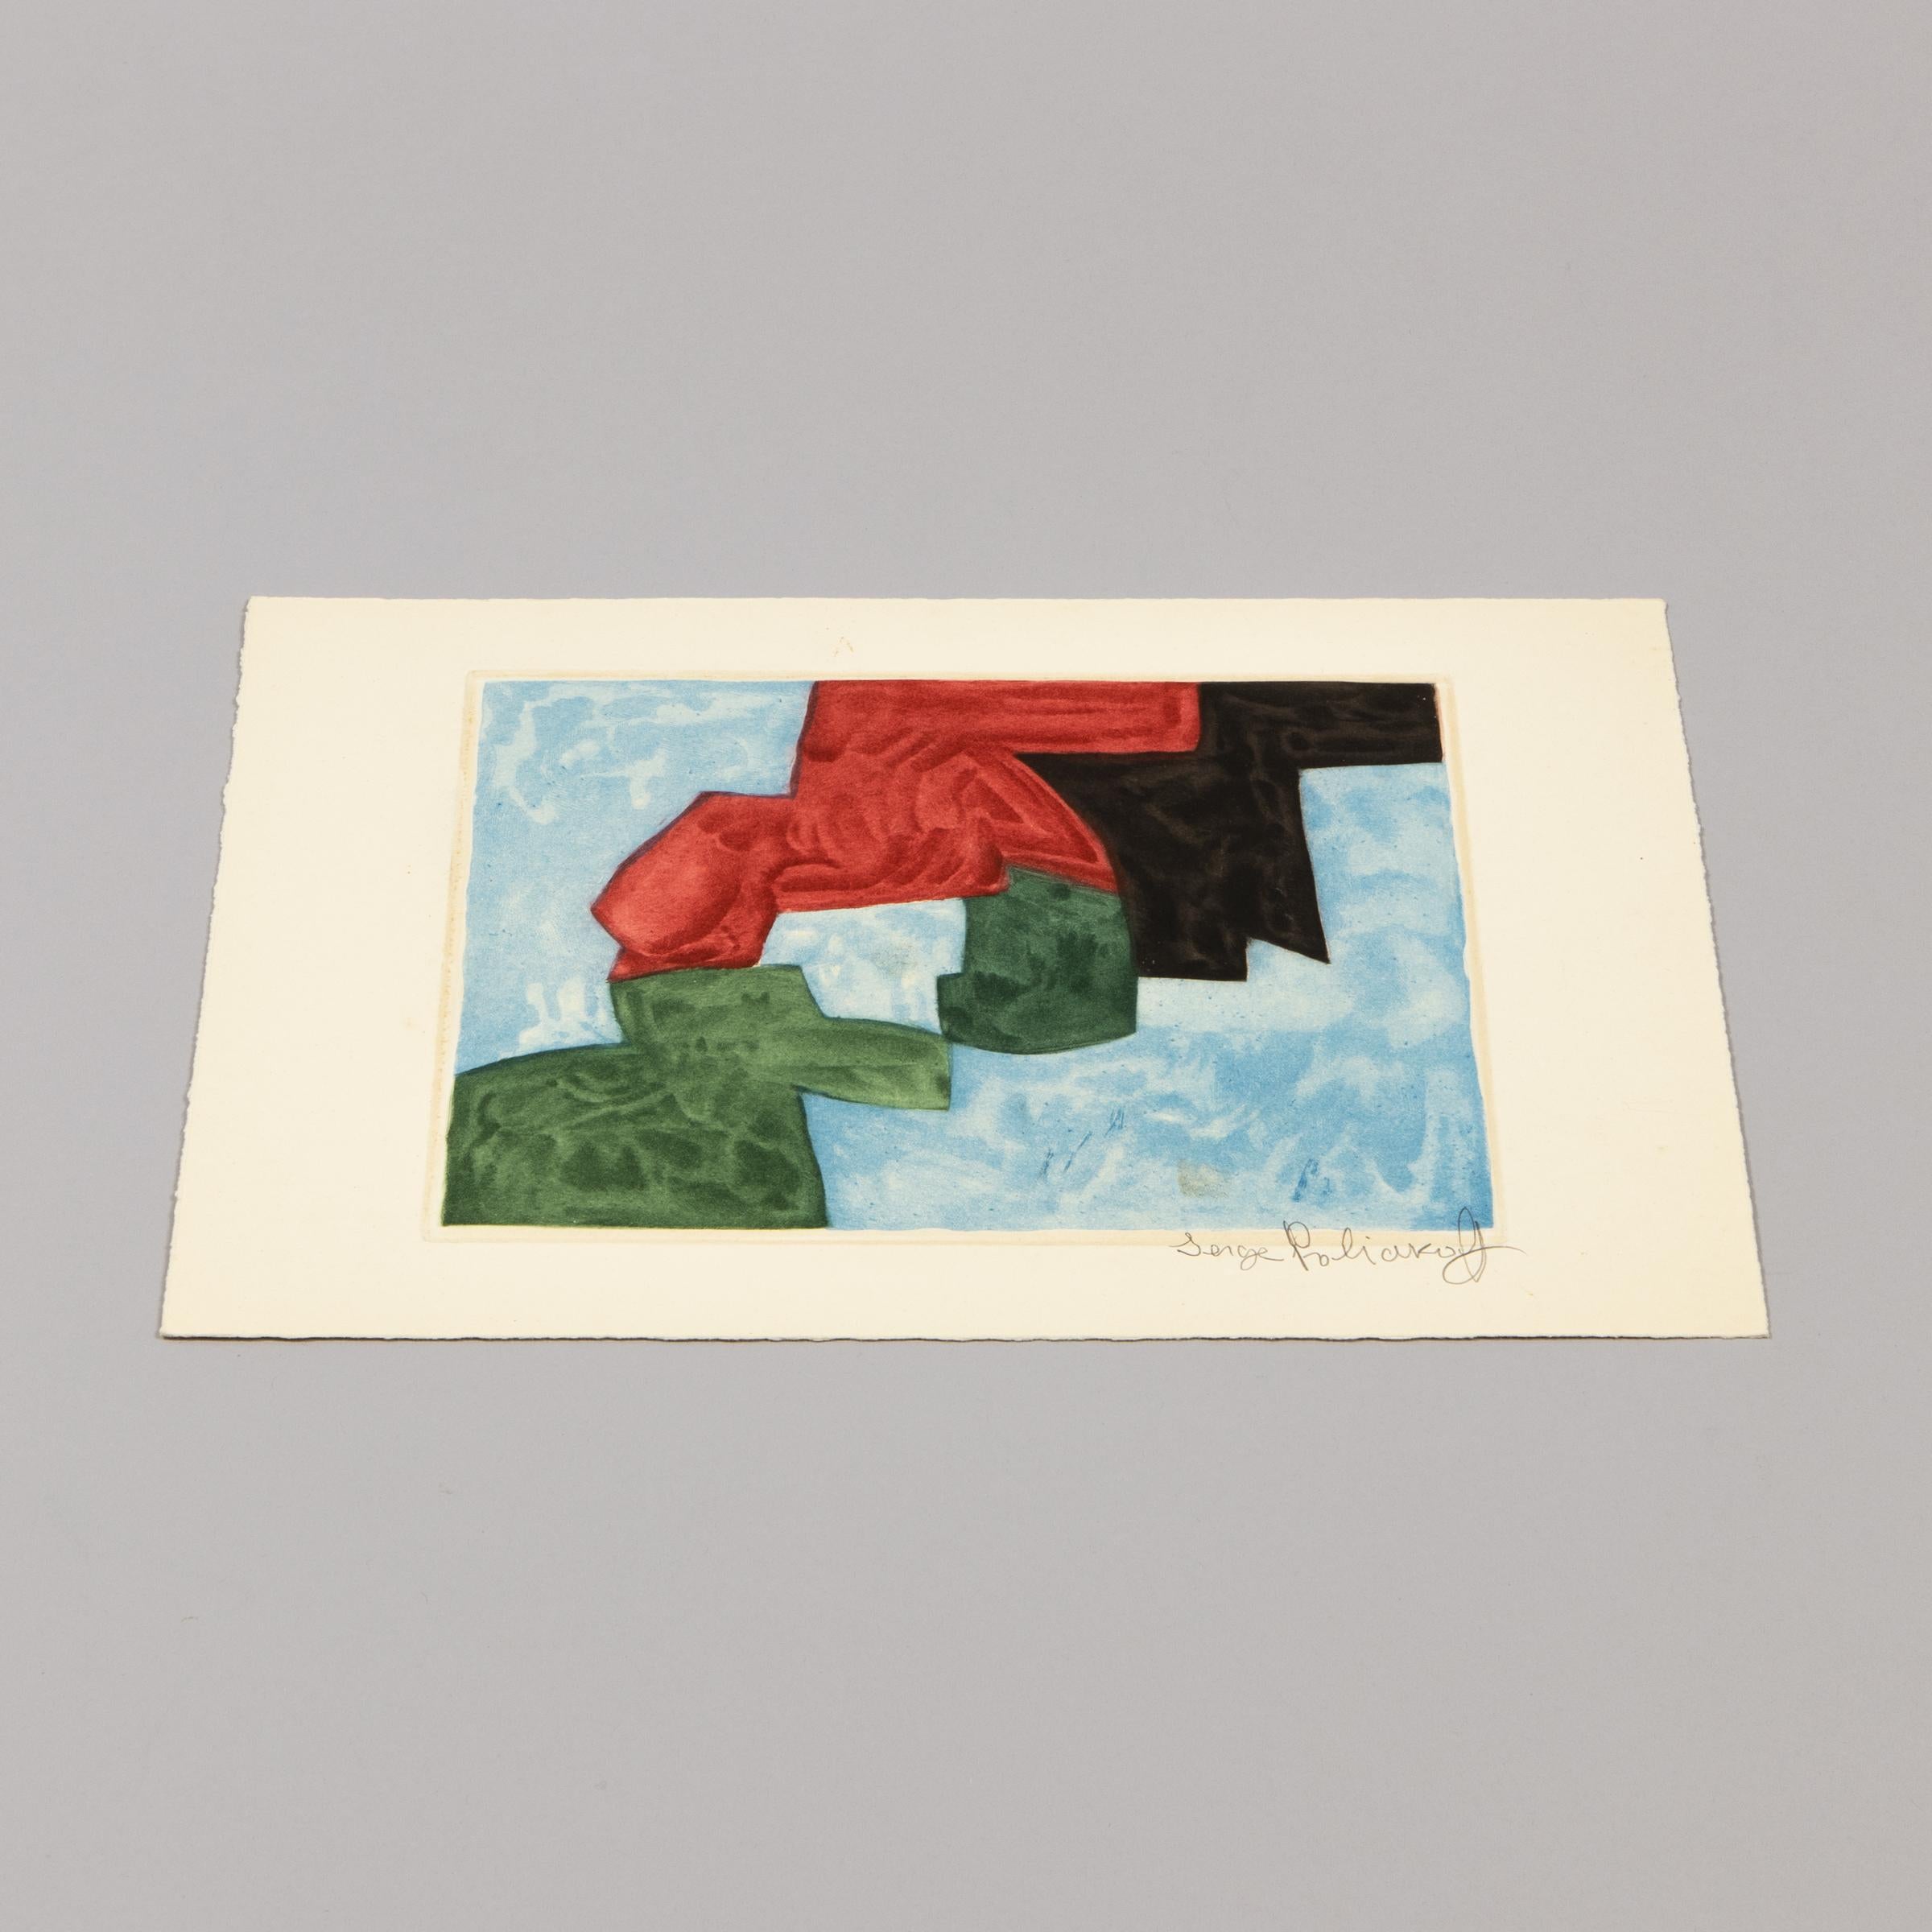 Serge Poliakoff (French-Russian, 1900–1969)
Composition Bleu, Noire, Rouge et Verte (from Werke Poliakoffs), 1964
Medium: Etching and aquatint on paper
Dimensions: 25.5 x 37.7 cm 
Edition of 300: This print with courtesy signature in pencil
Printer: